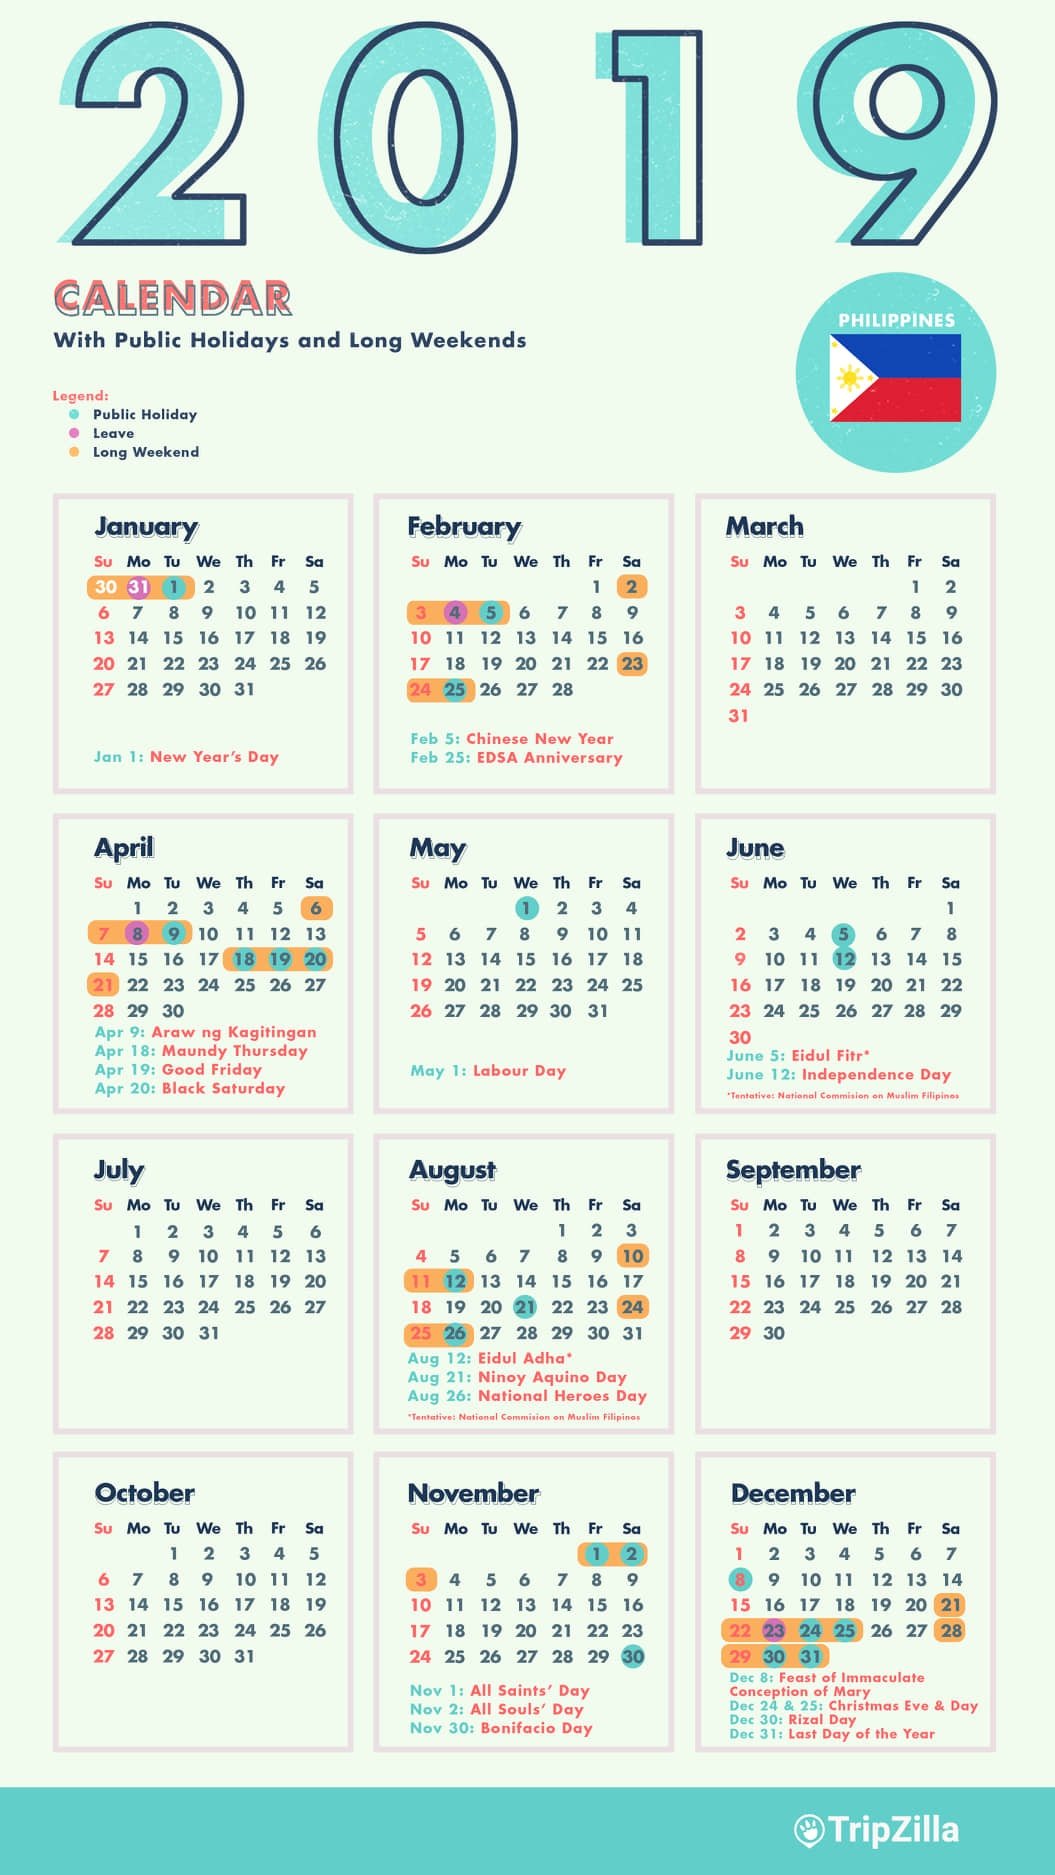 10 Long Weekends in the Philippines in 2019 with Calendar Cheatsheet